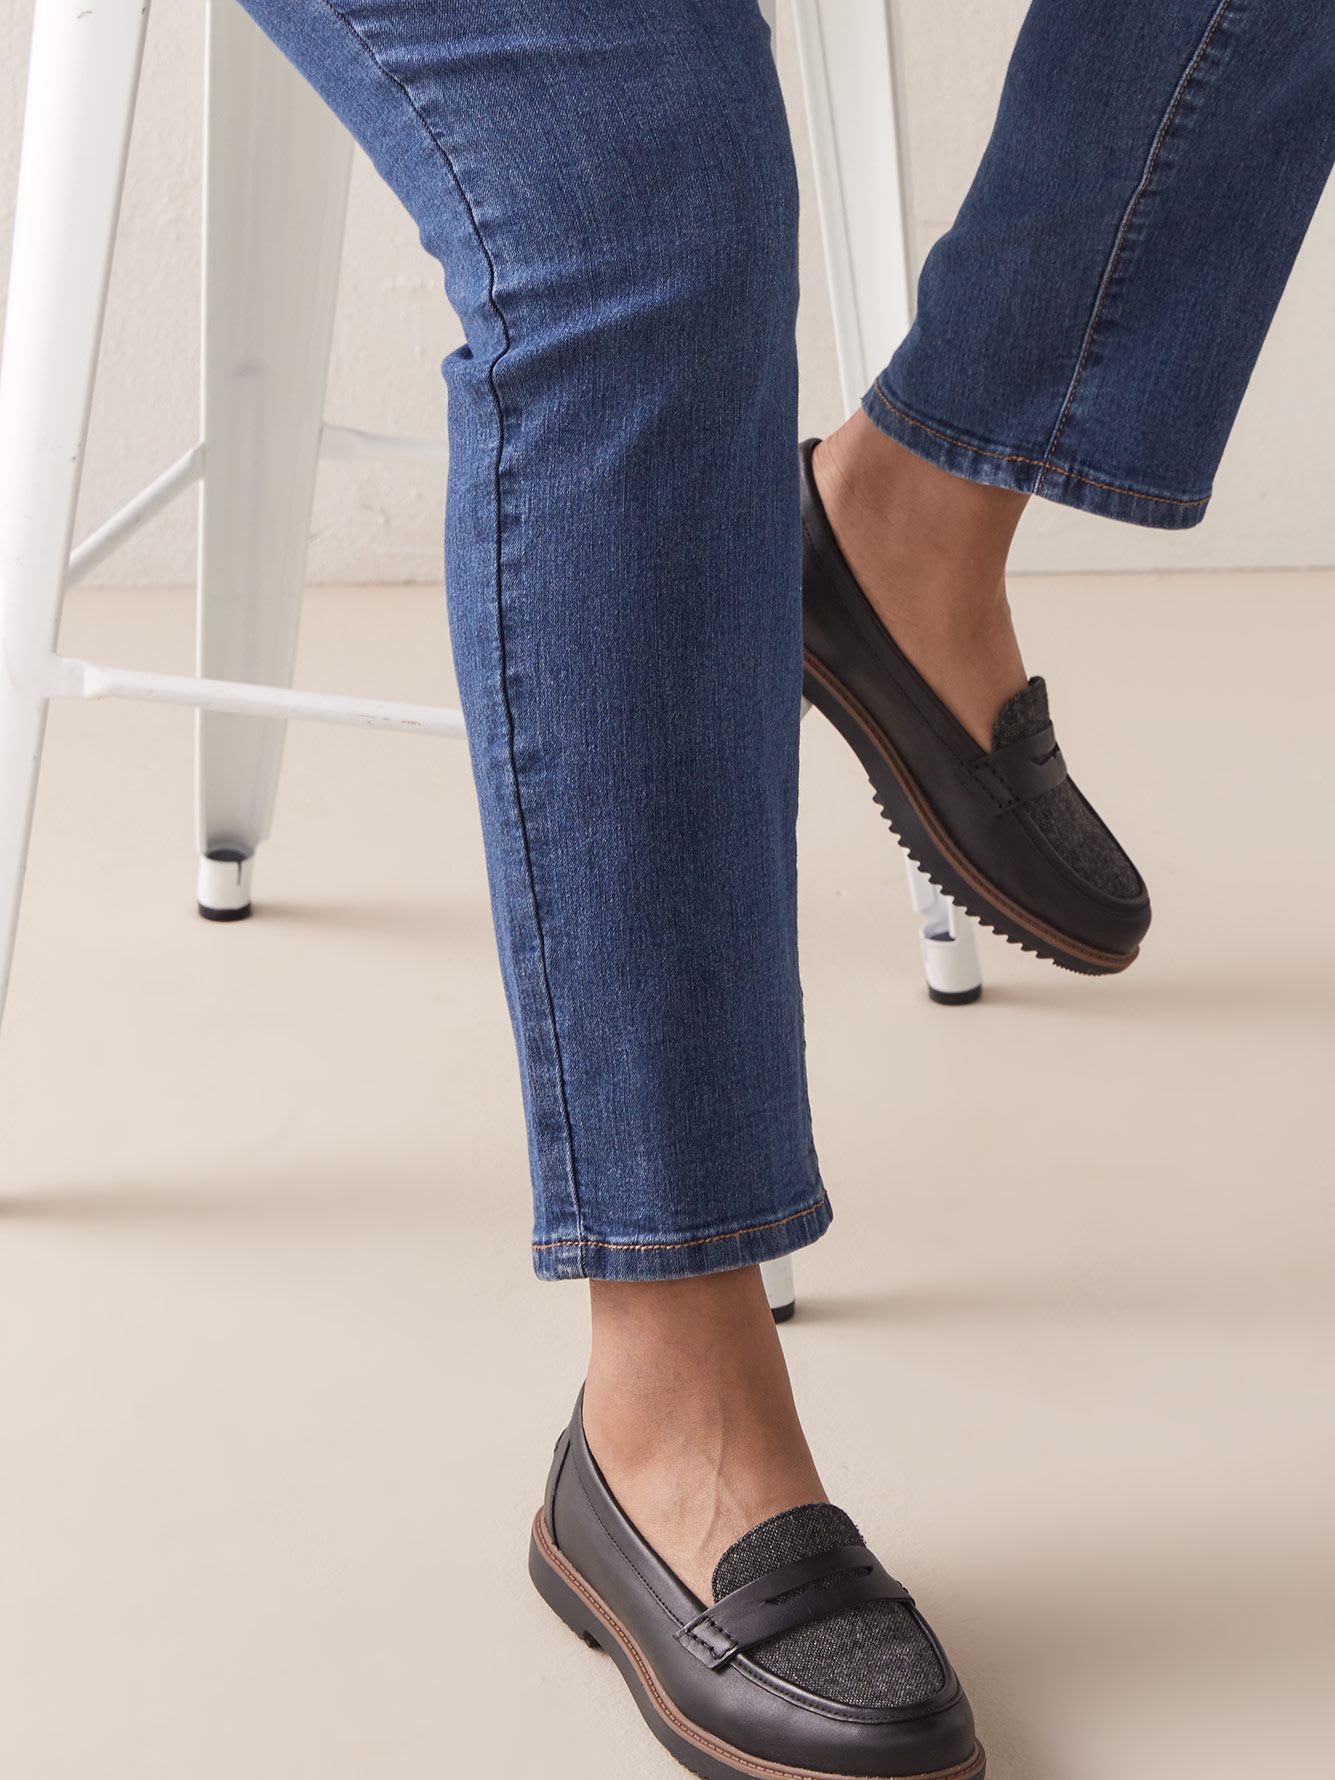 clarks penny loafers